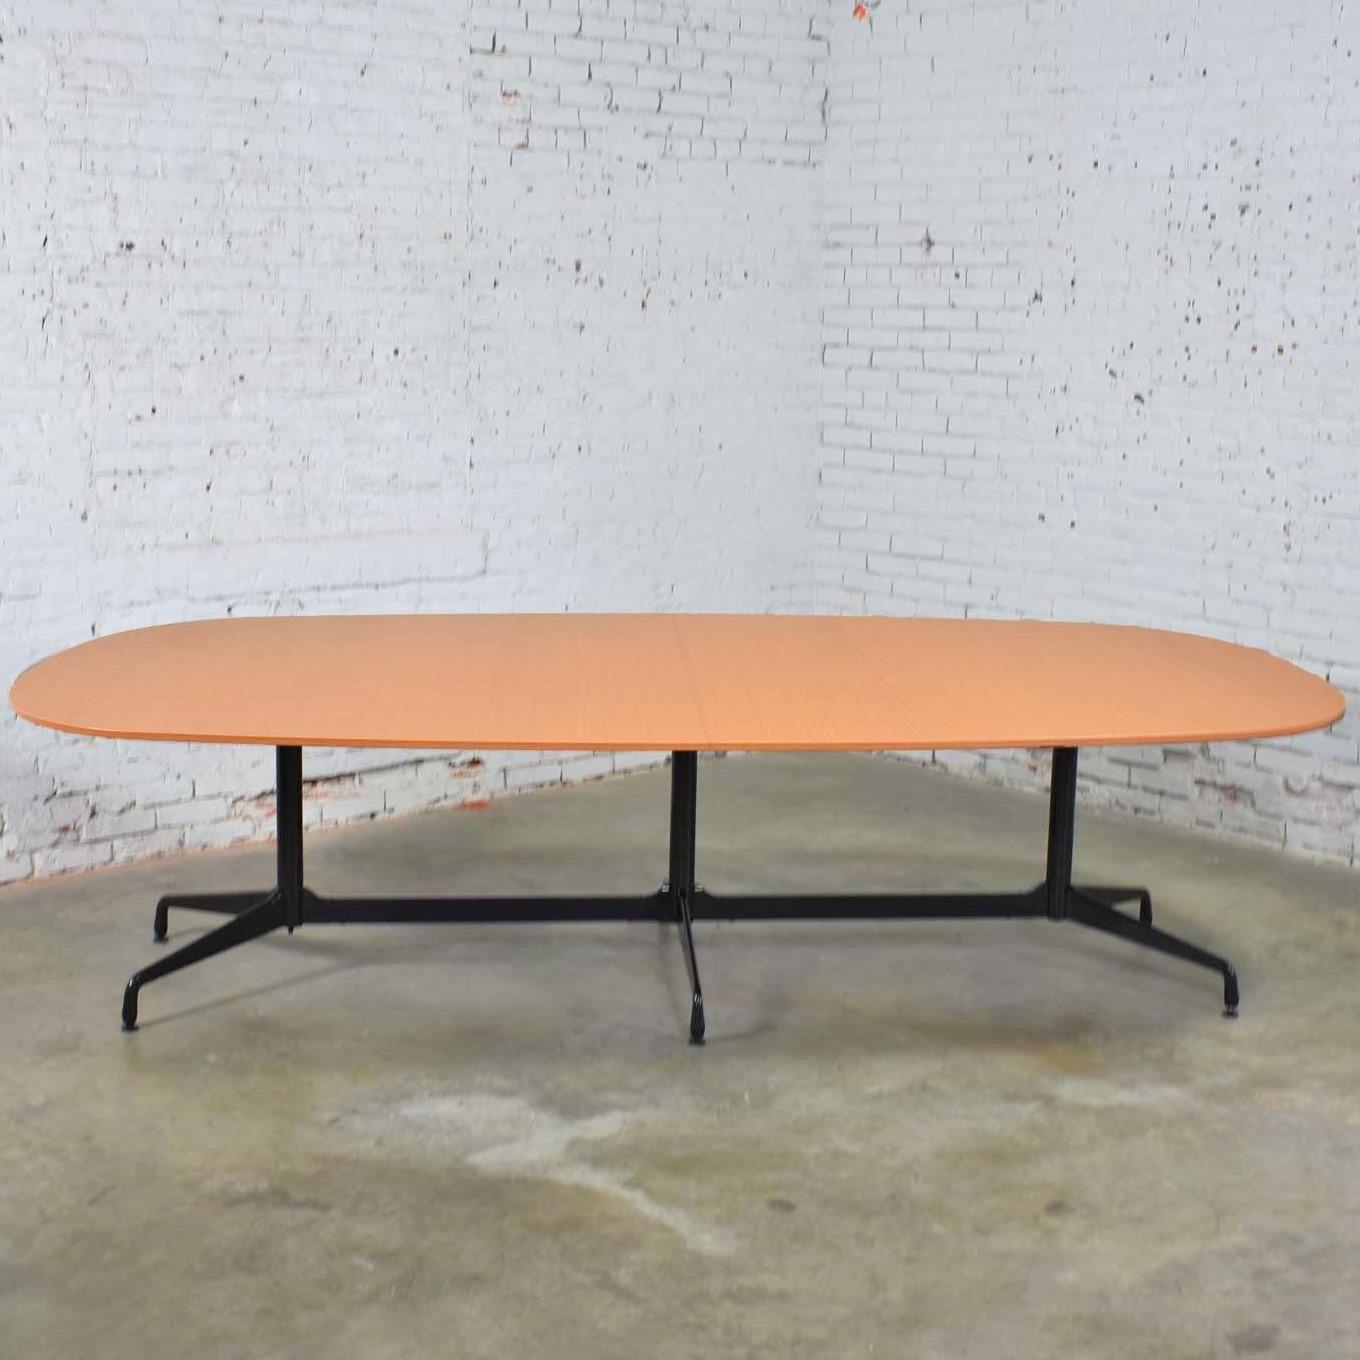 Handsome and iconic elliptical segmented base dining or conference table designed by Charles and Ray Eames for Herman Miller. This one is 120 inches long with a center leg and has a cherry-look laminate top. It is in fabulous vintage condition with